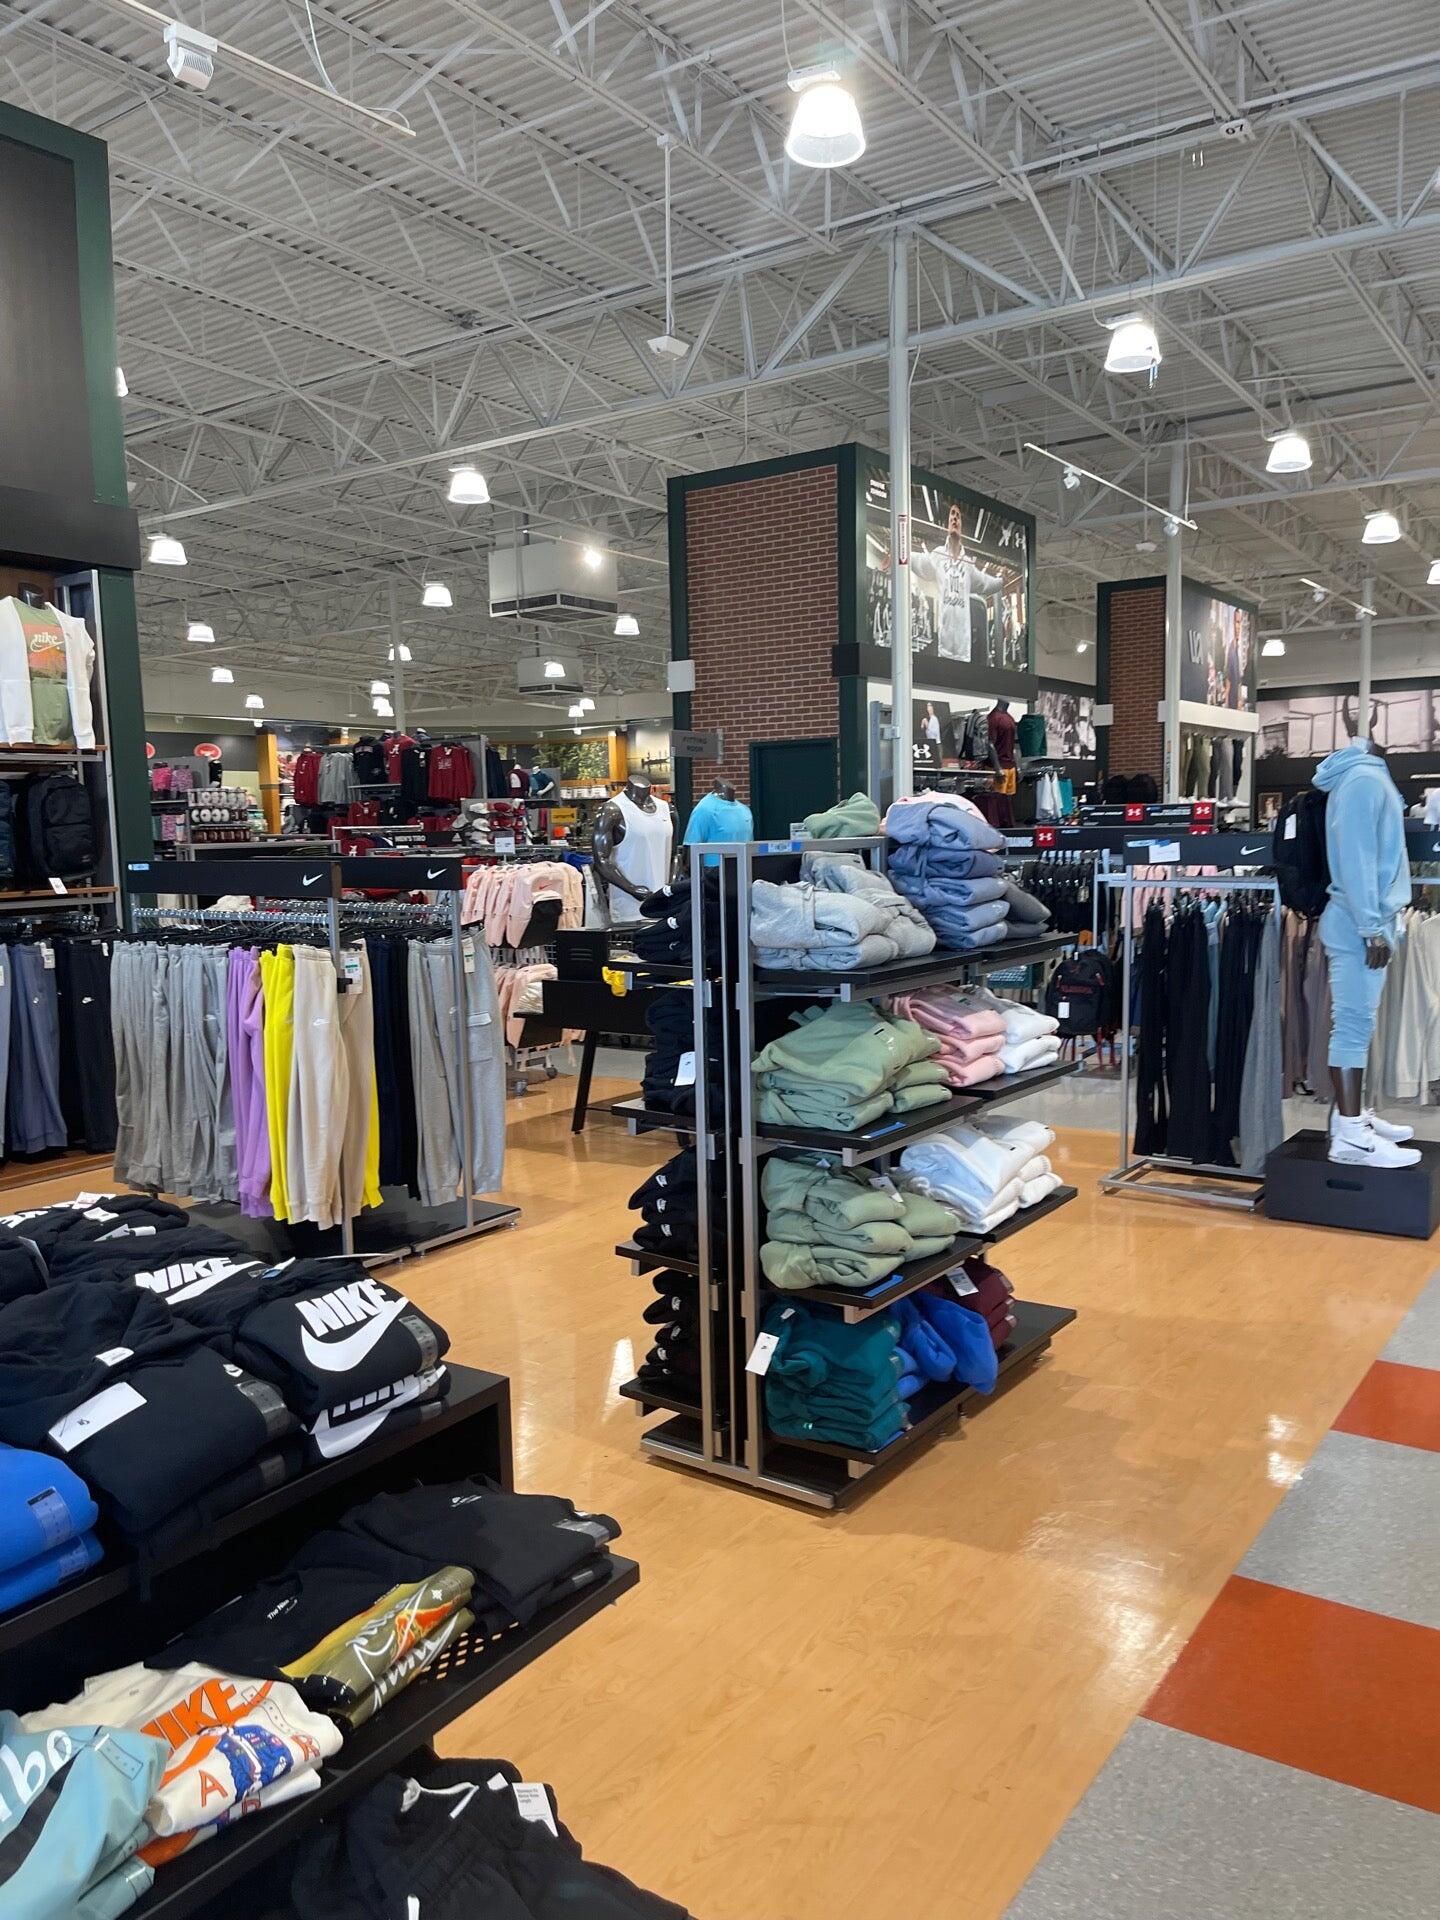 DICK'S Sporting Goods Discounts and Cash Back for Everyone